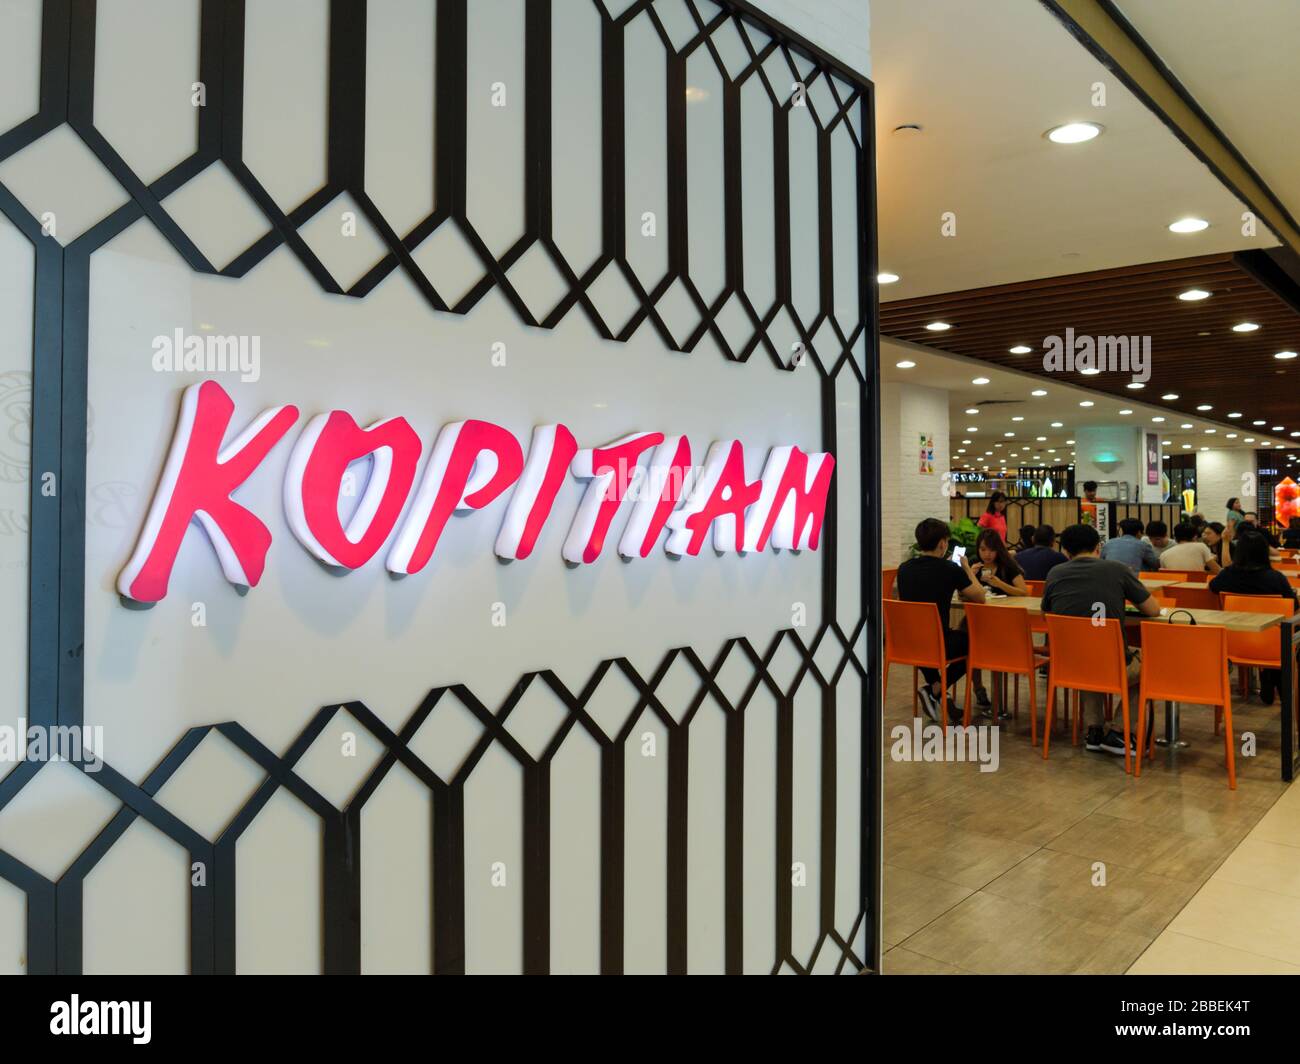 SINGAPORE – 30 DEC 2019 – Exterior of the Kopitiam Food Court at Plaza Singapura shopping mall. Diners are visible in the background. The Kopitiam log Stock Photo